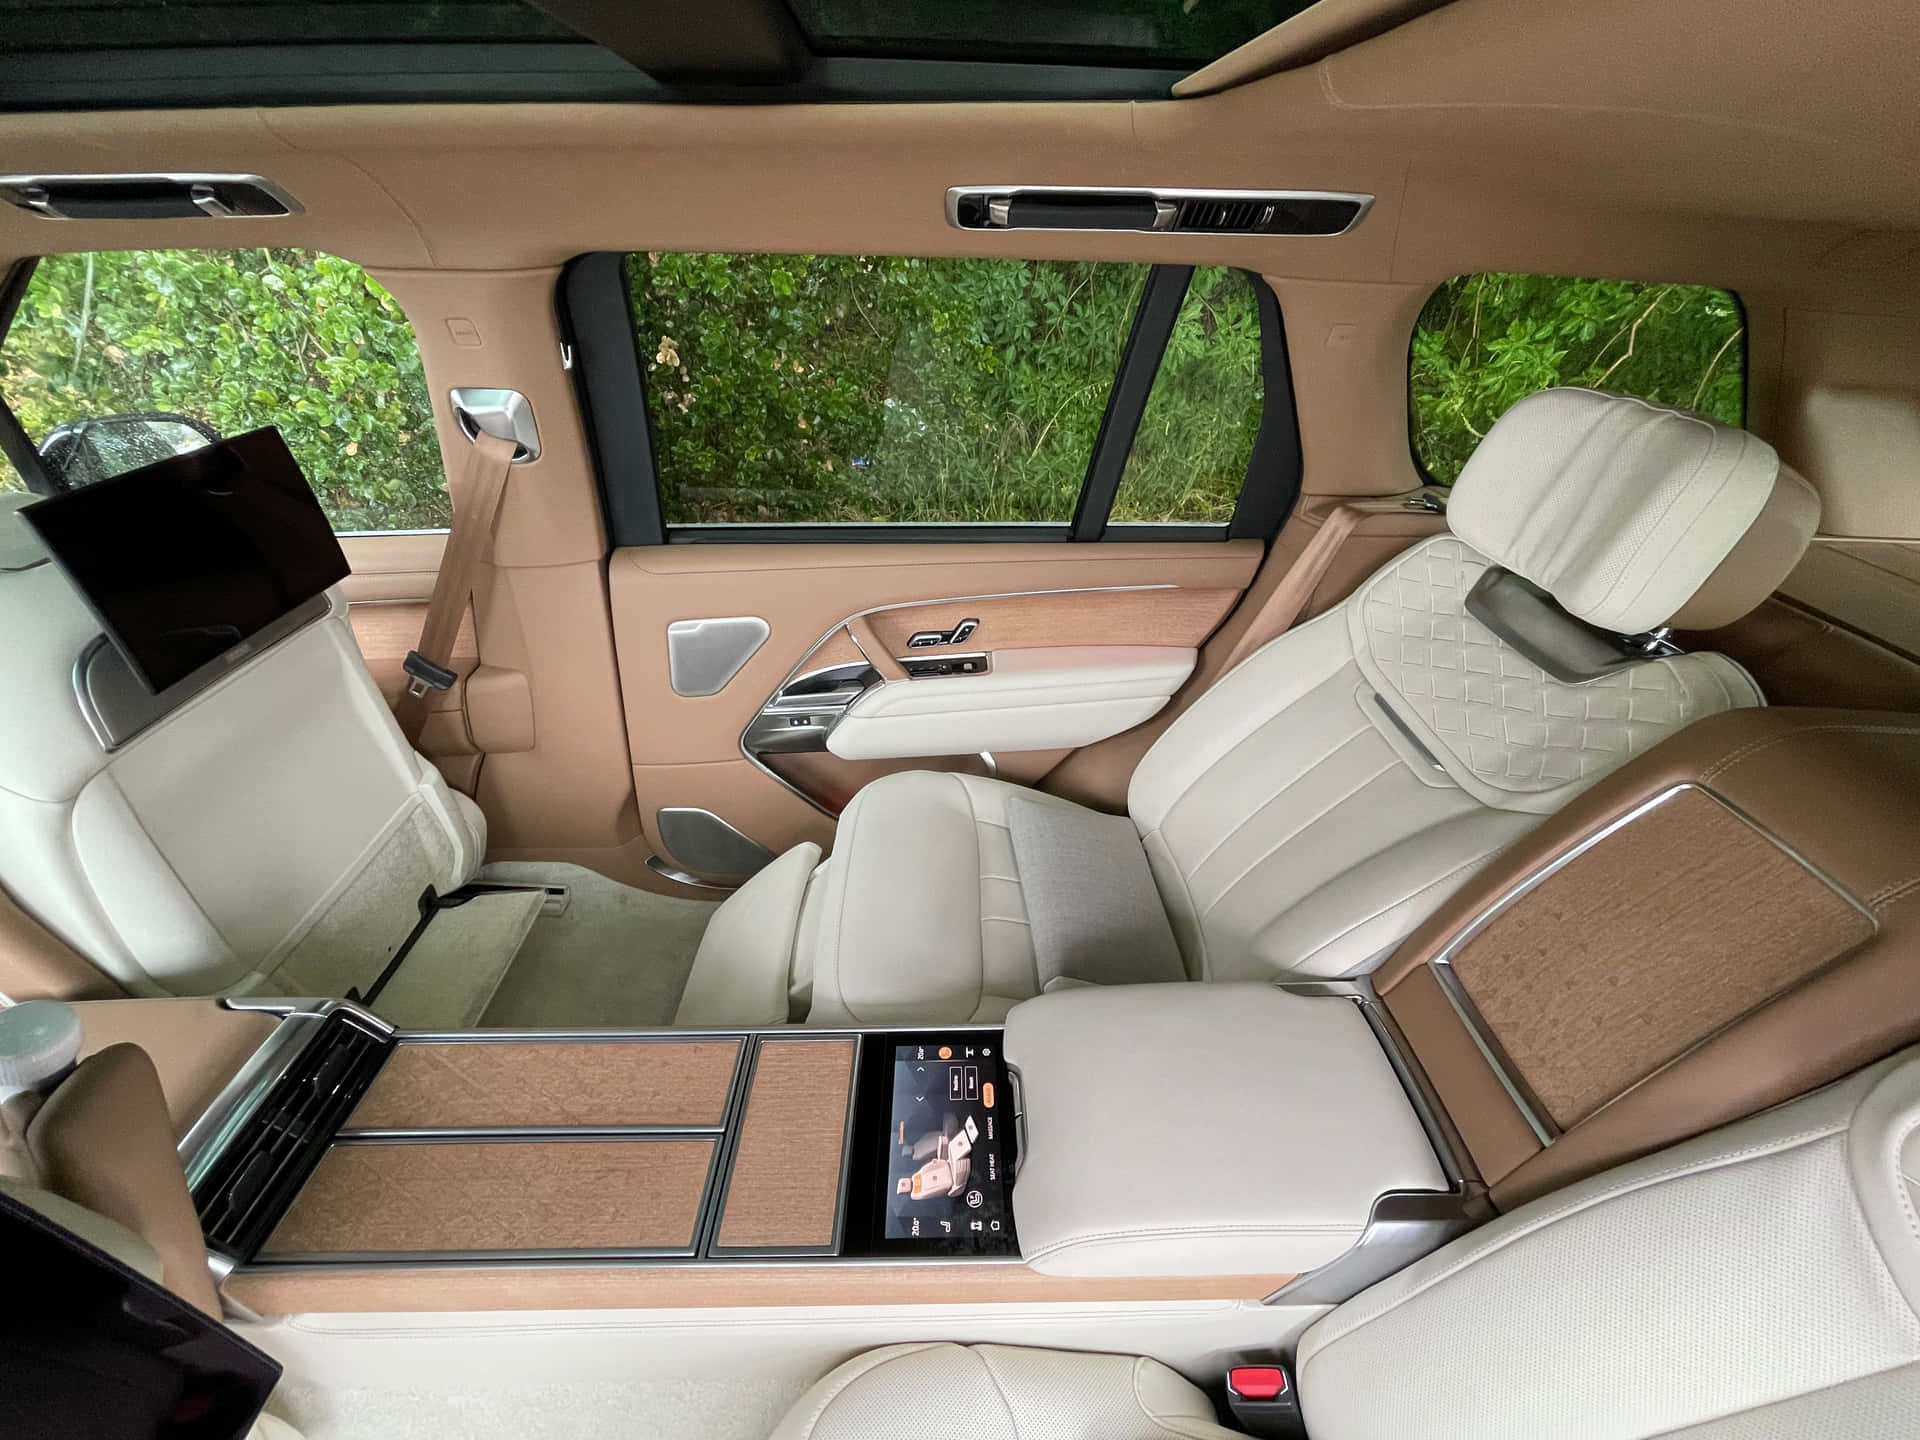 The Interior Of A Suv With Leather Seats And A Leather Steering Wheel